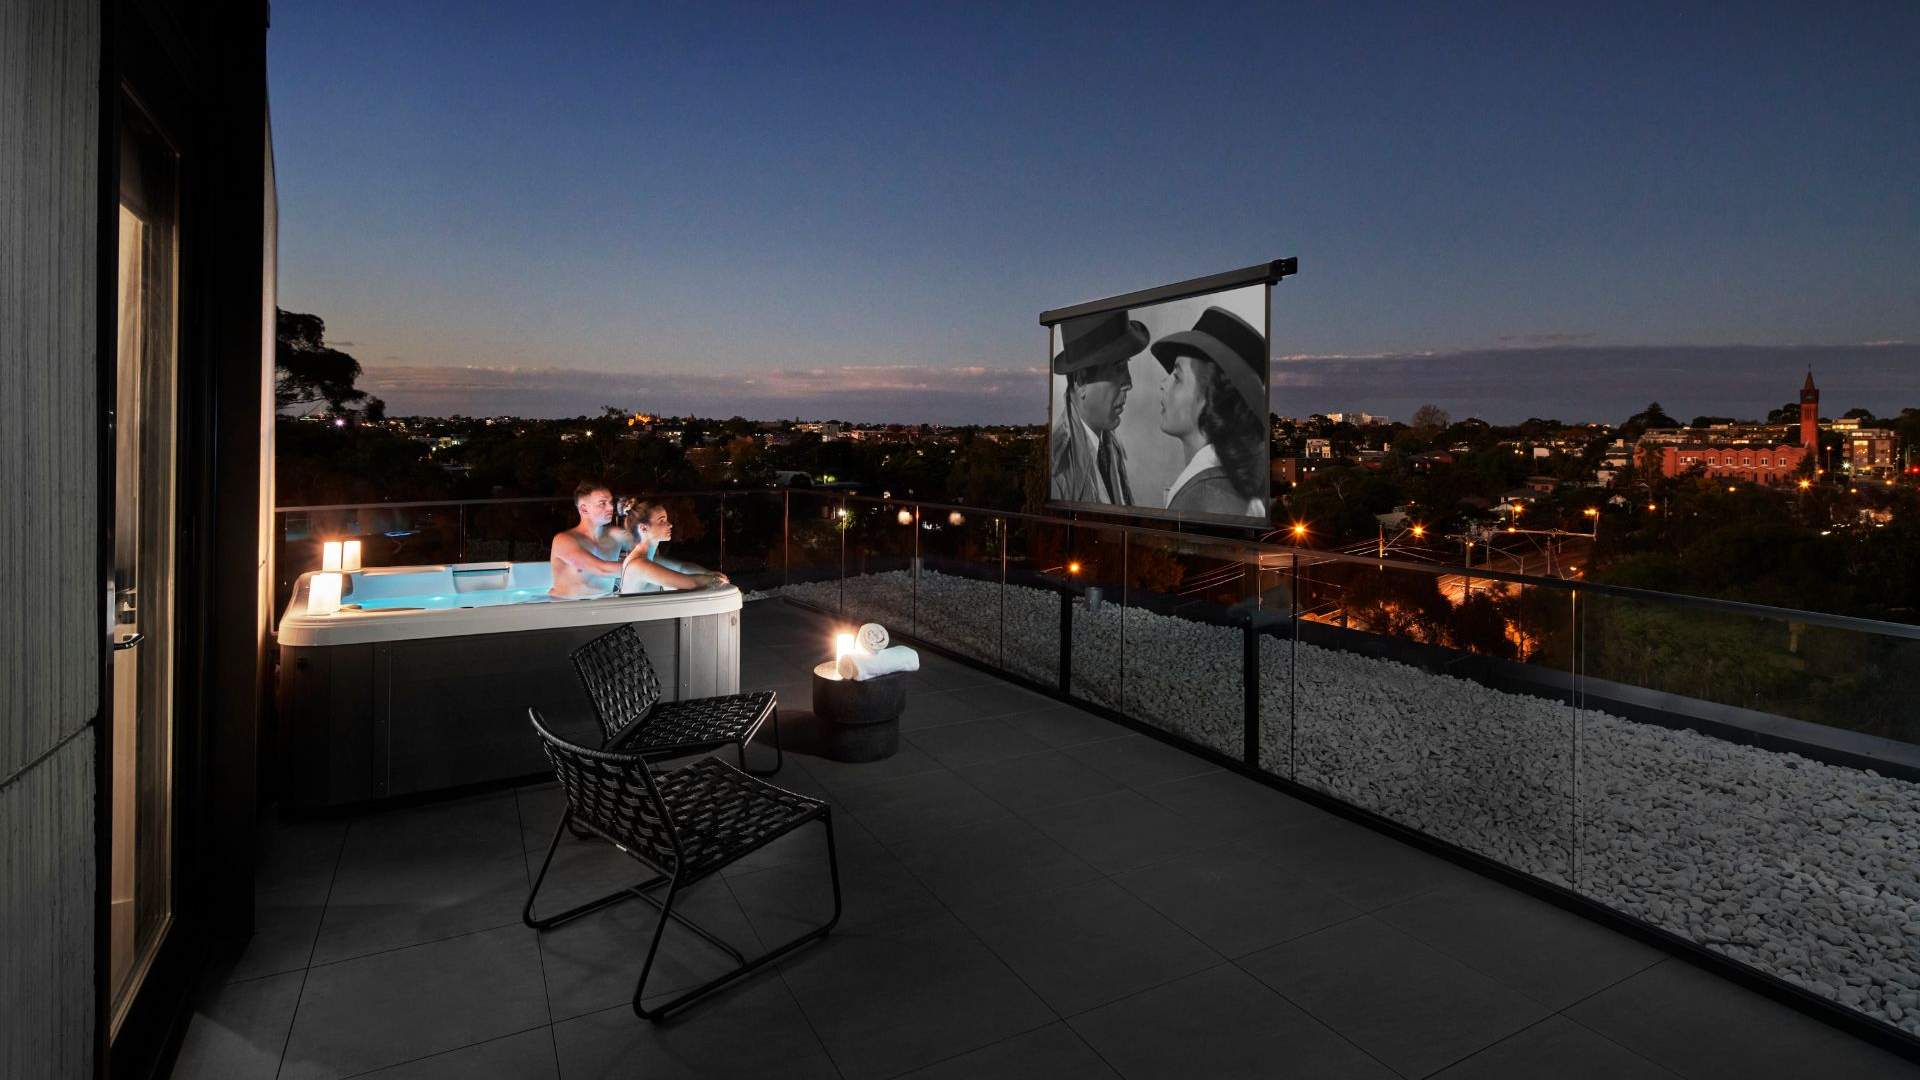 Element Richmond Hotel Is Now Offering Rooms With Outdoor Hot Tub And Movie Sessions Concrete 3454